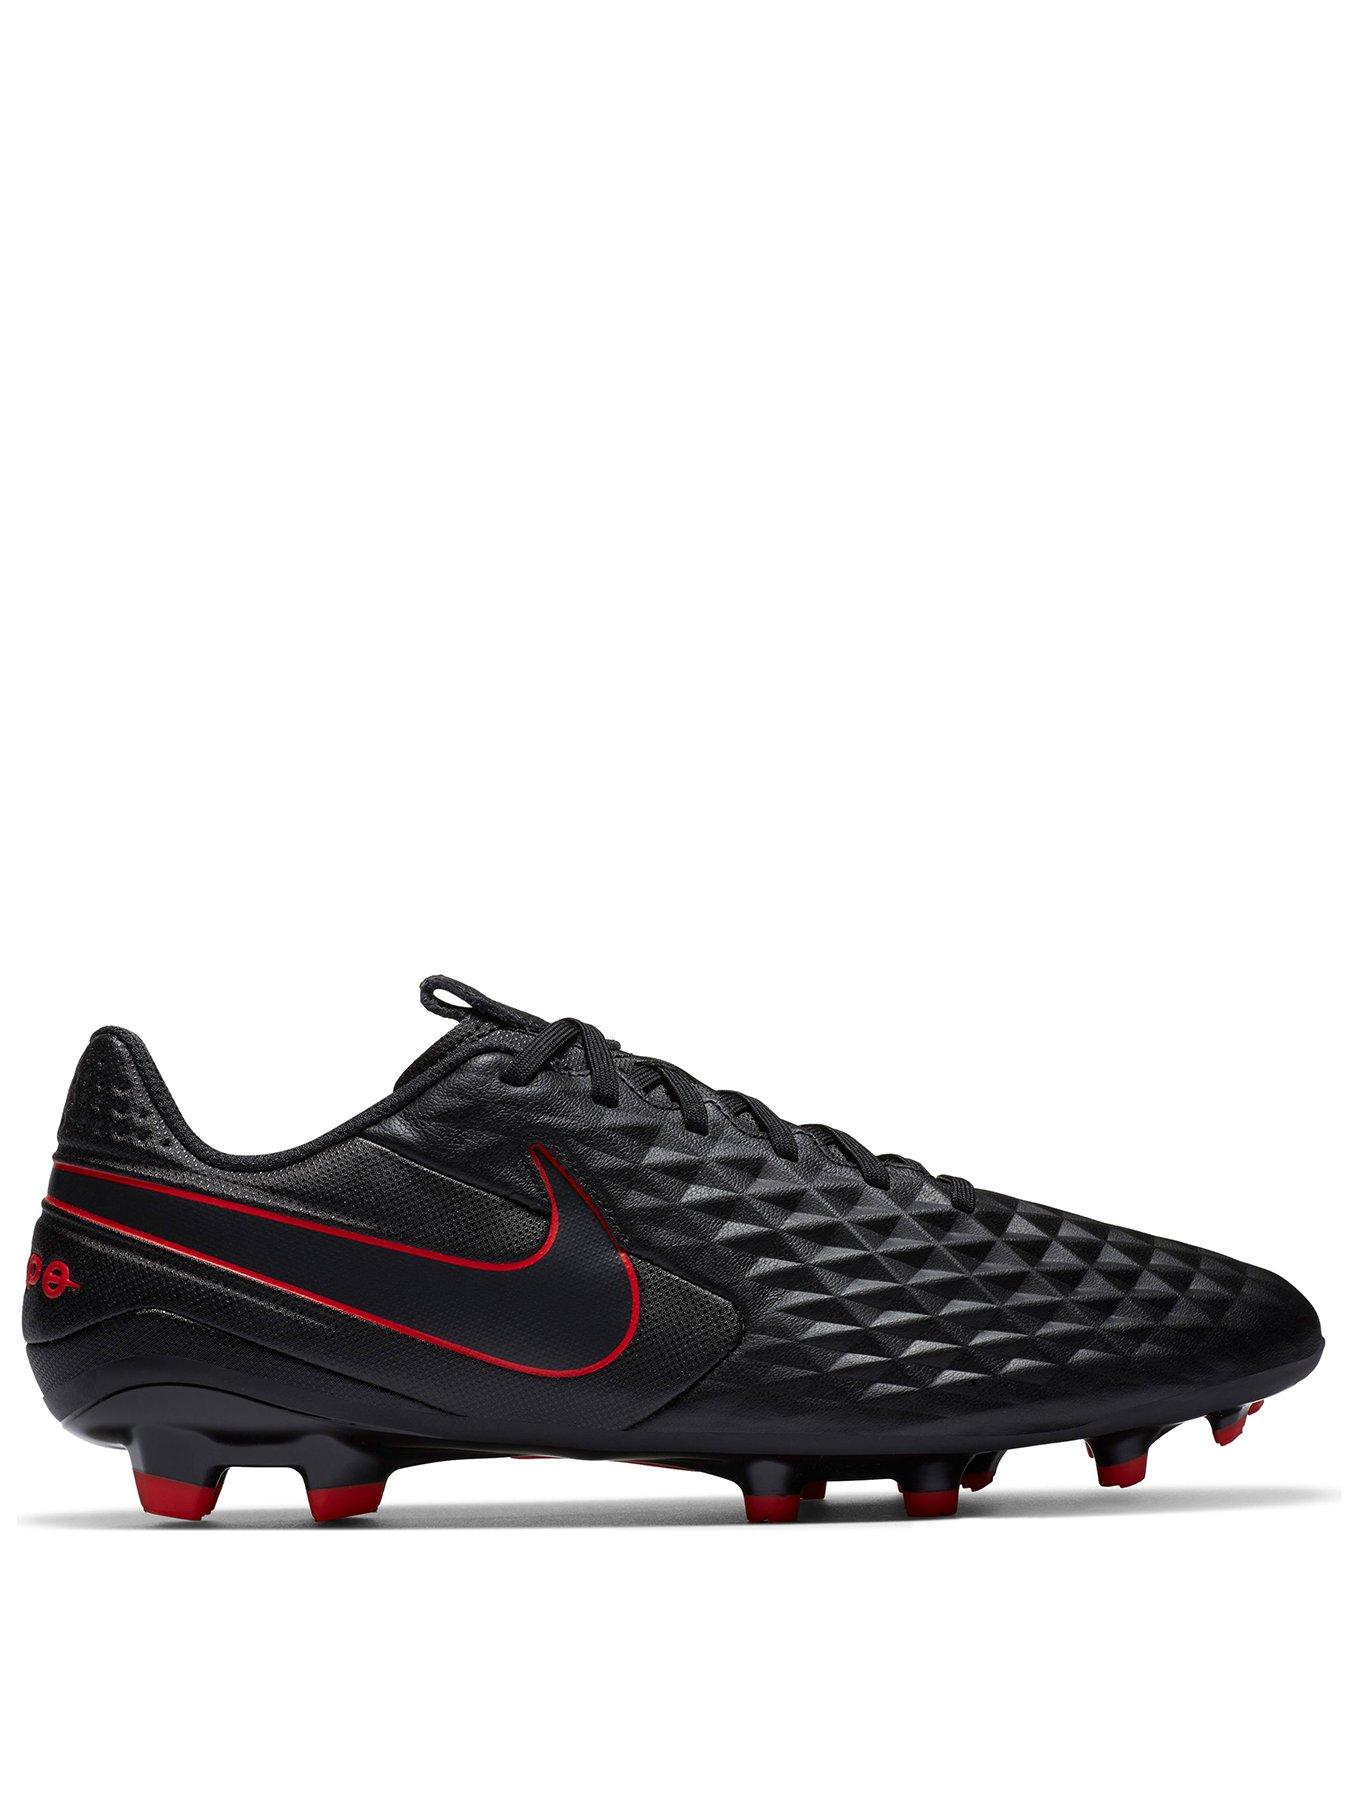 cool football boots 219